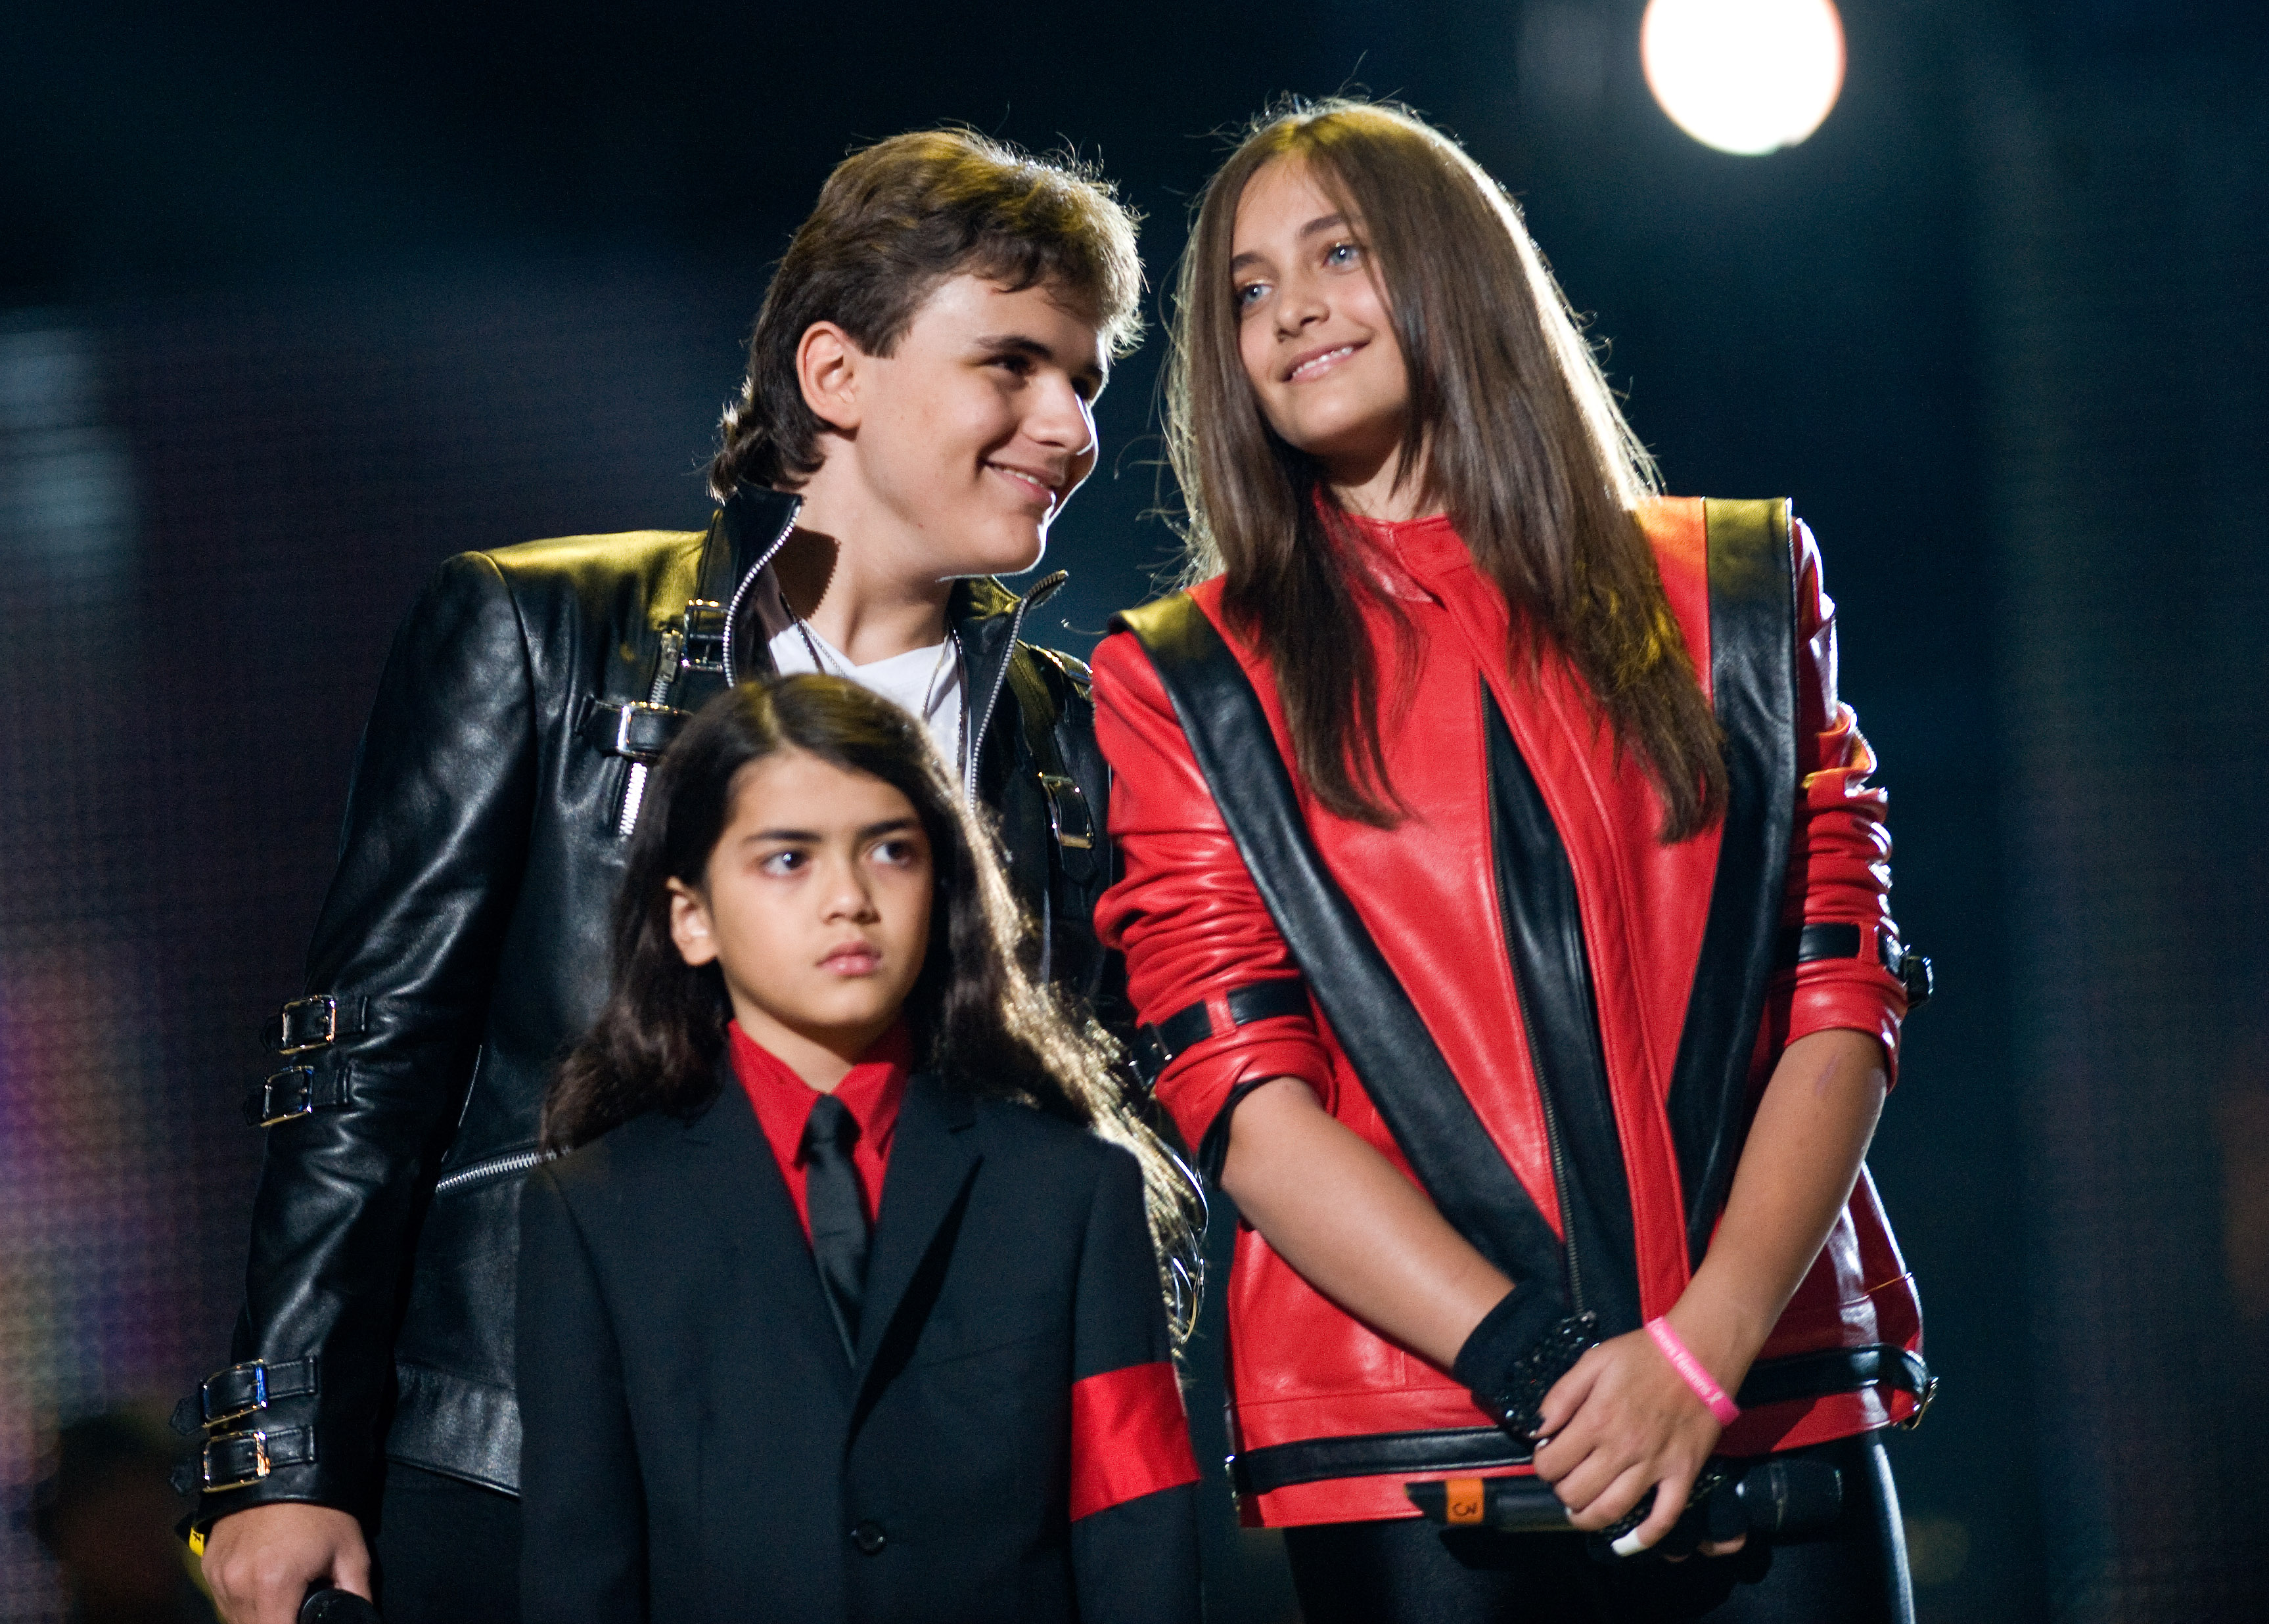 Prince Michael, Blanket, and Paris Jackson at the Michael Forever Tribute Concert on October 8, 2011 in Cardiff, Wales | Source: Getty Images